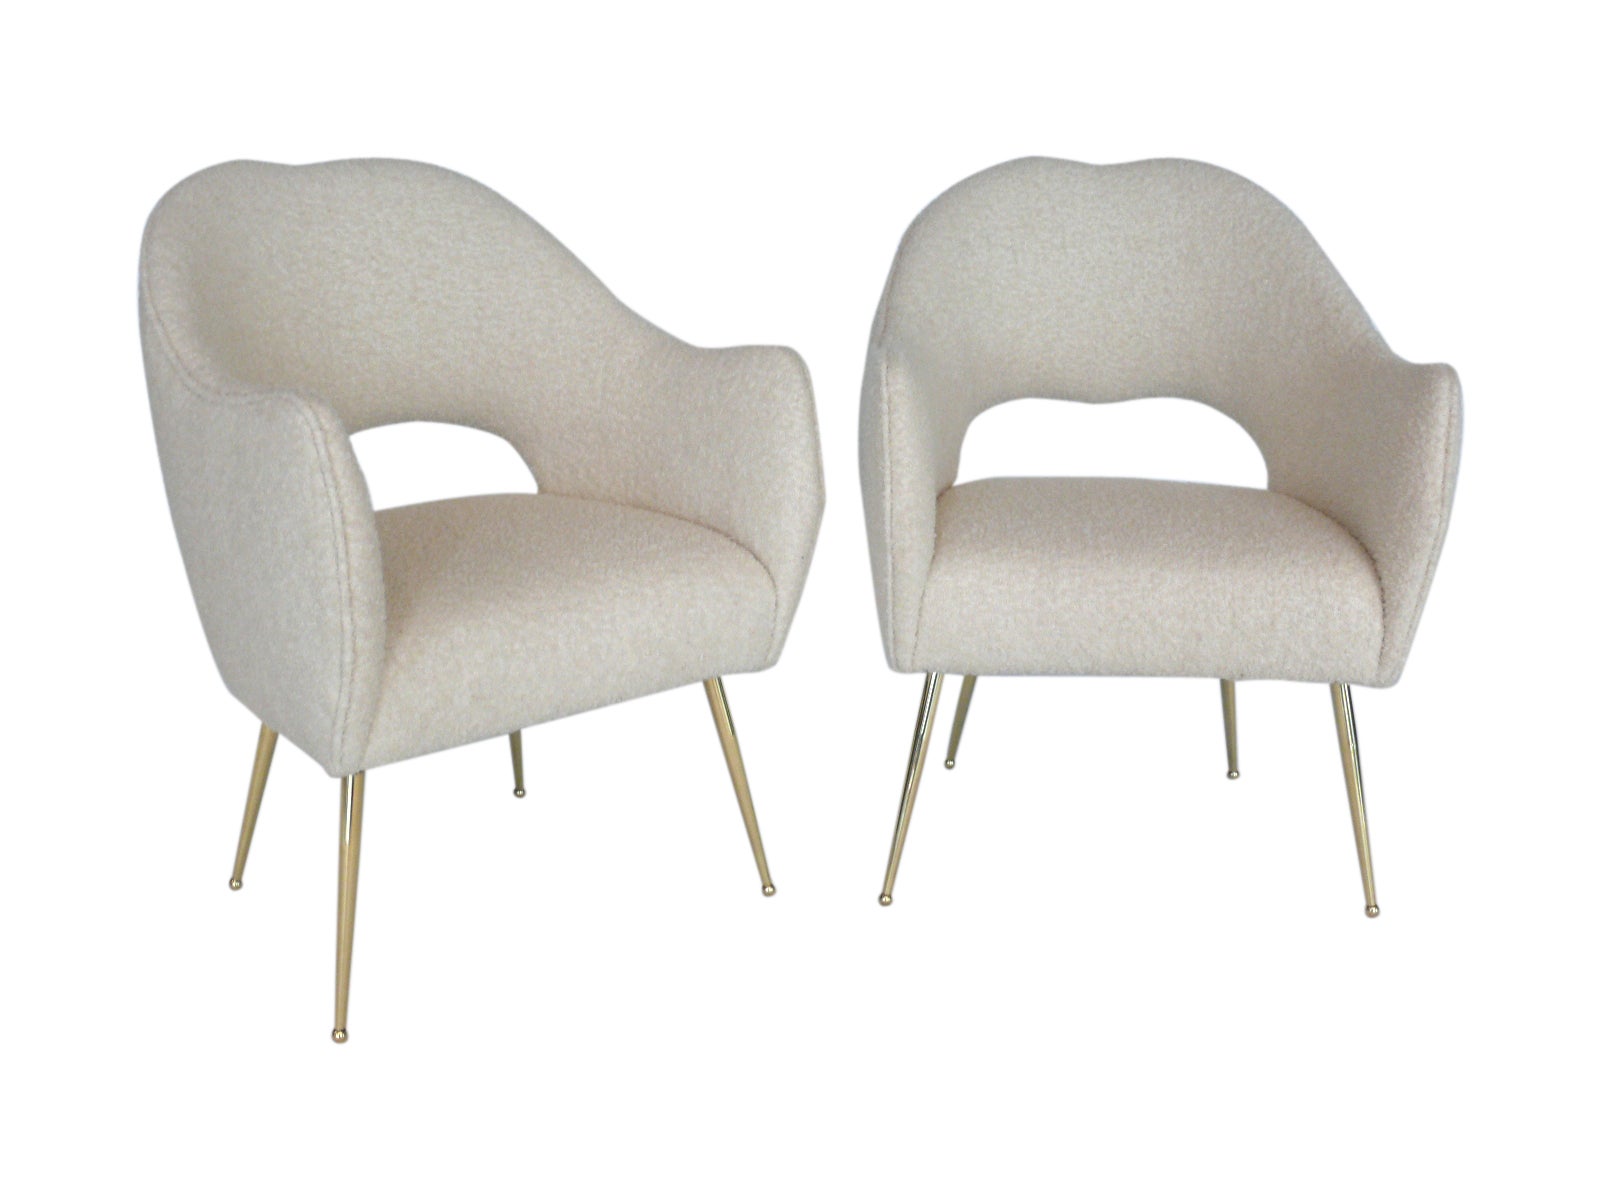 Italian Wool Boucle Sculptural Chairs